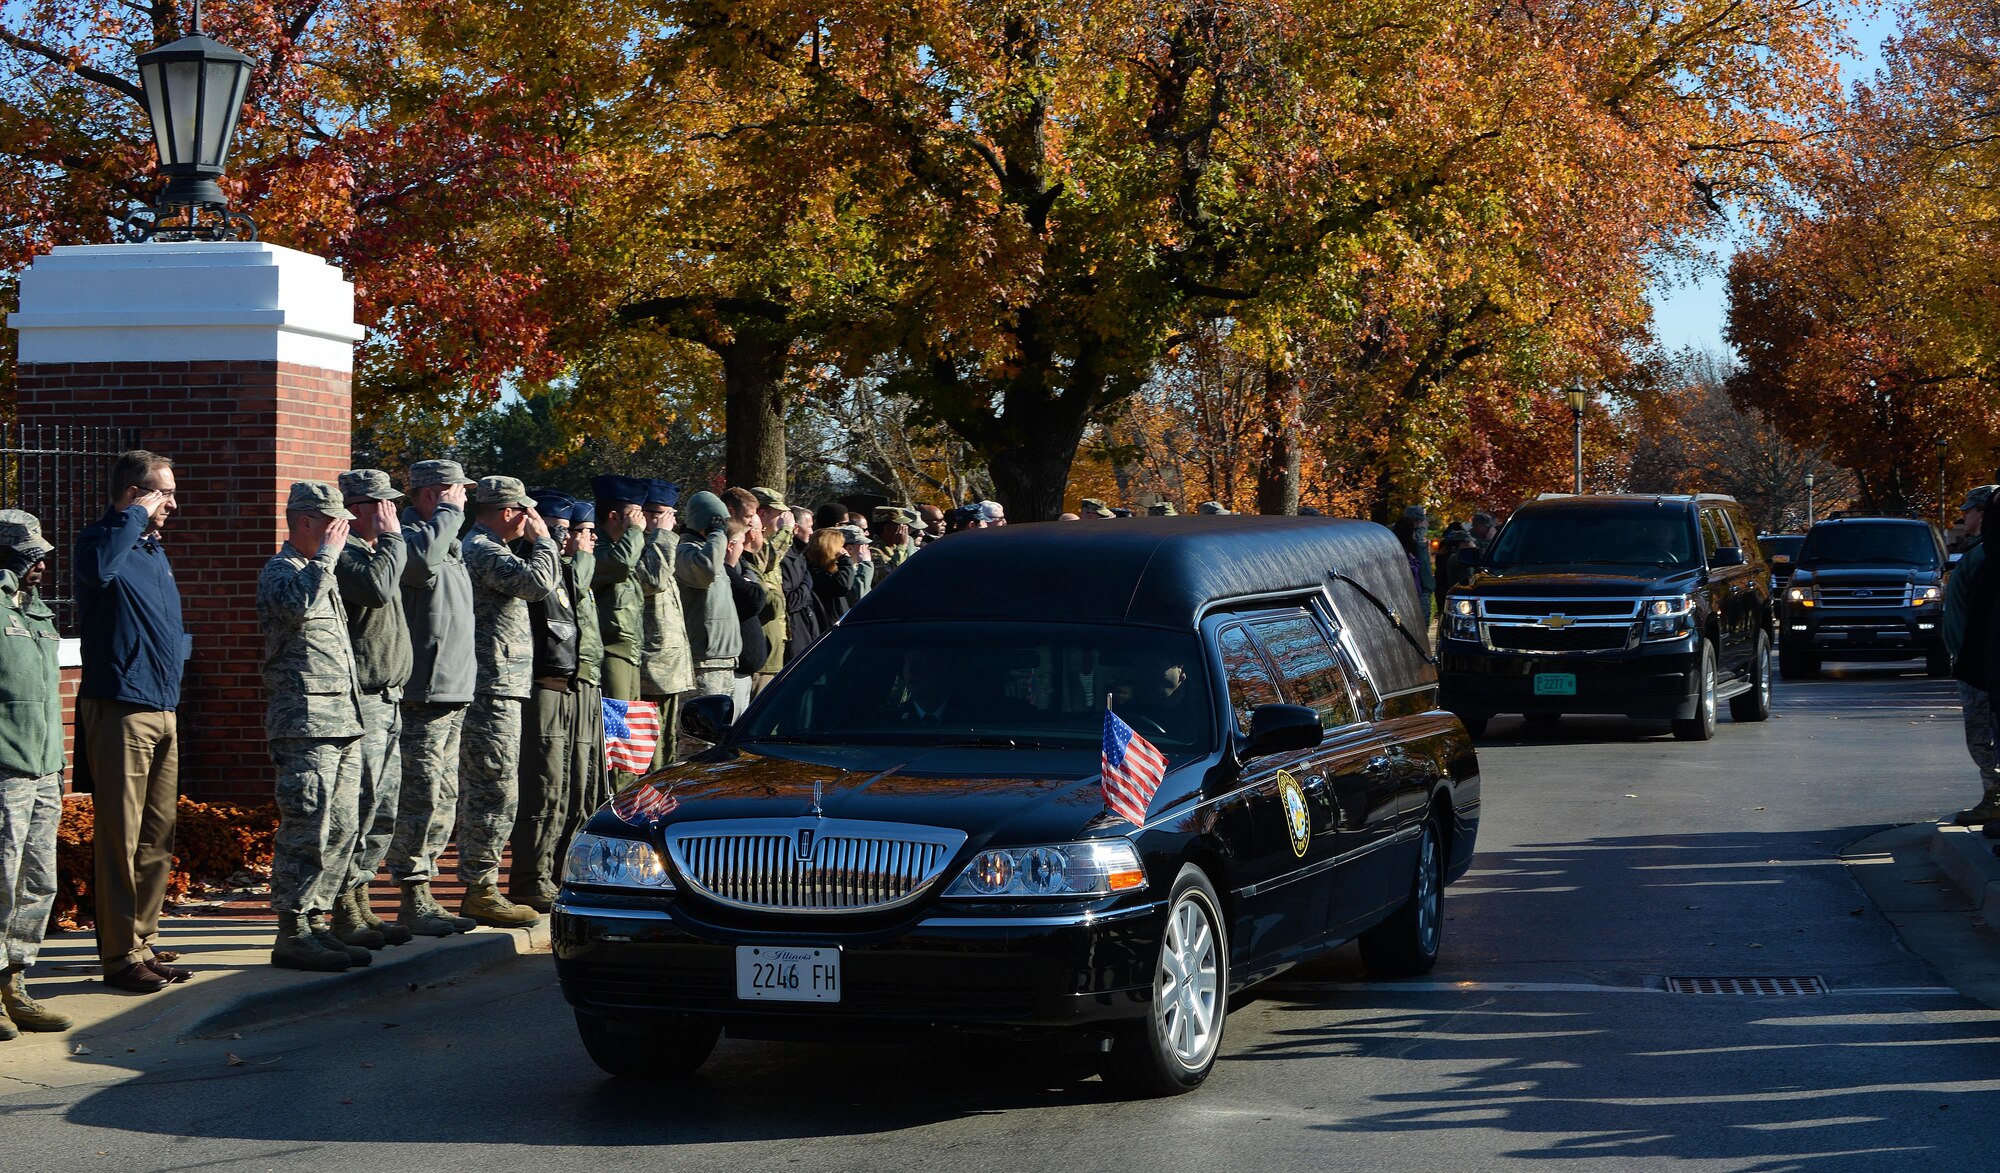 Scott Air Force Base, Illinois personnel pay their respects to 20-year-old Pfc. Tyler R. Iubelt, Nov. 21, 2016. Iubelt died Nov. 12 as a result of injuries sustained from an improvised explosive device in Bagram, Afghanistan. His remains transited through Scott AFB with his family on the way to his final resting place in DuQuion, Illinois. He was assigned to Fort Hood, Texas. (U.S. Air Force photo by Senior Airman Erica Fowler)